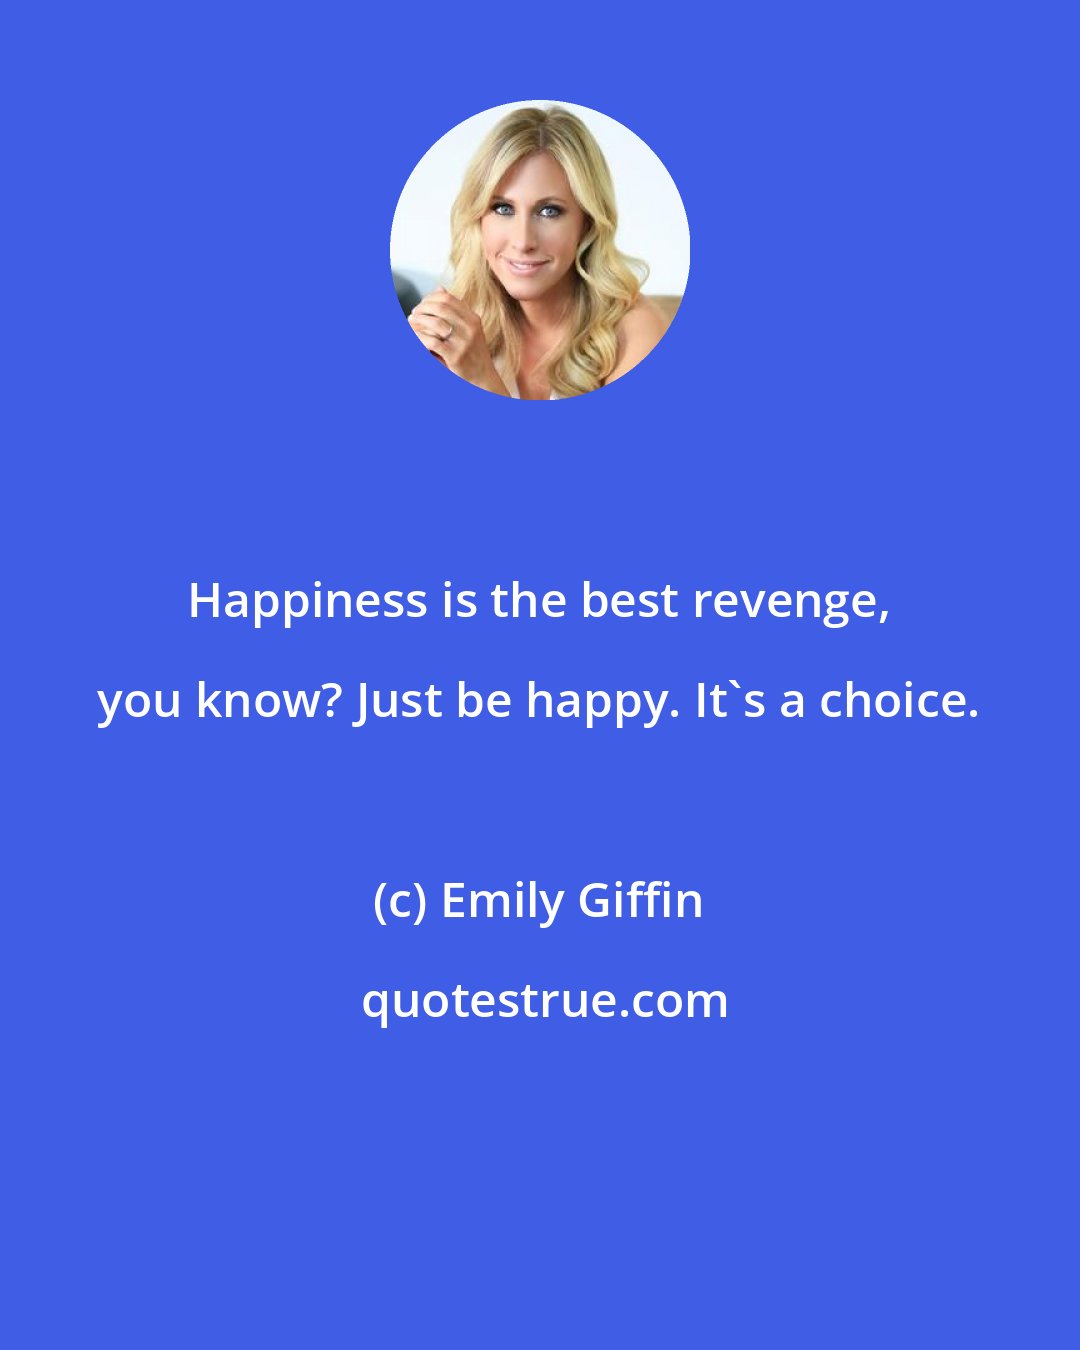 Emily Giffin: Happiness is the best revenge, you know? Just be happy. It's a choice.